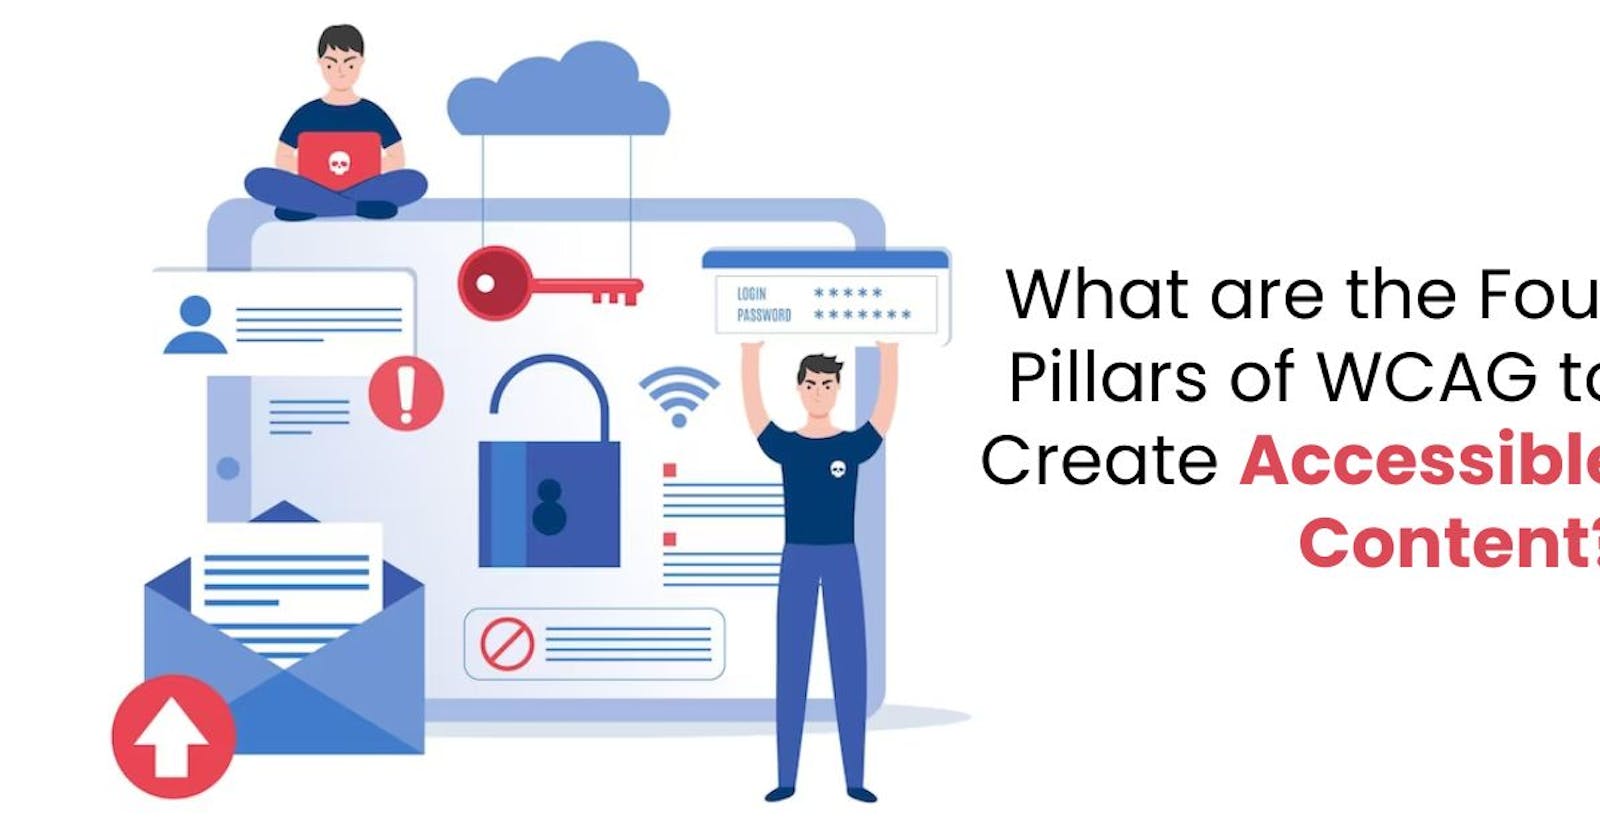 What are the Four Pillars of WCAG to Create Accessible Content?